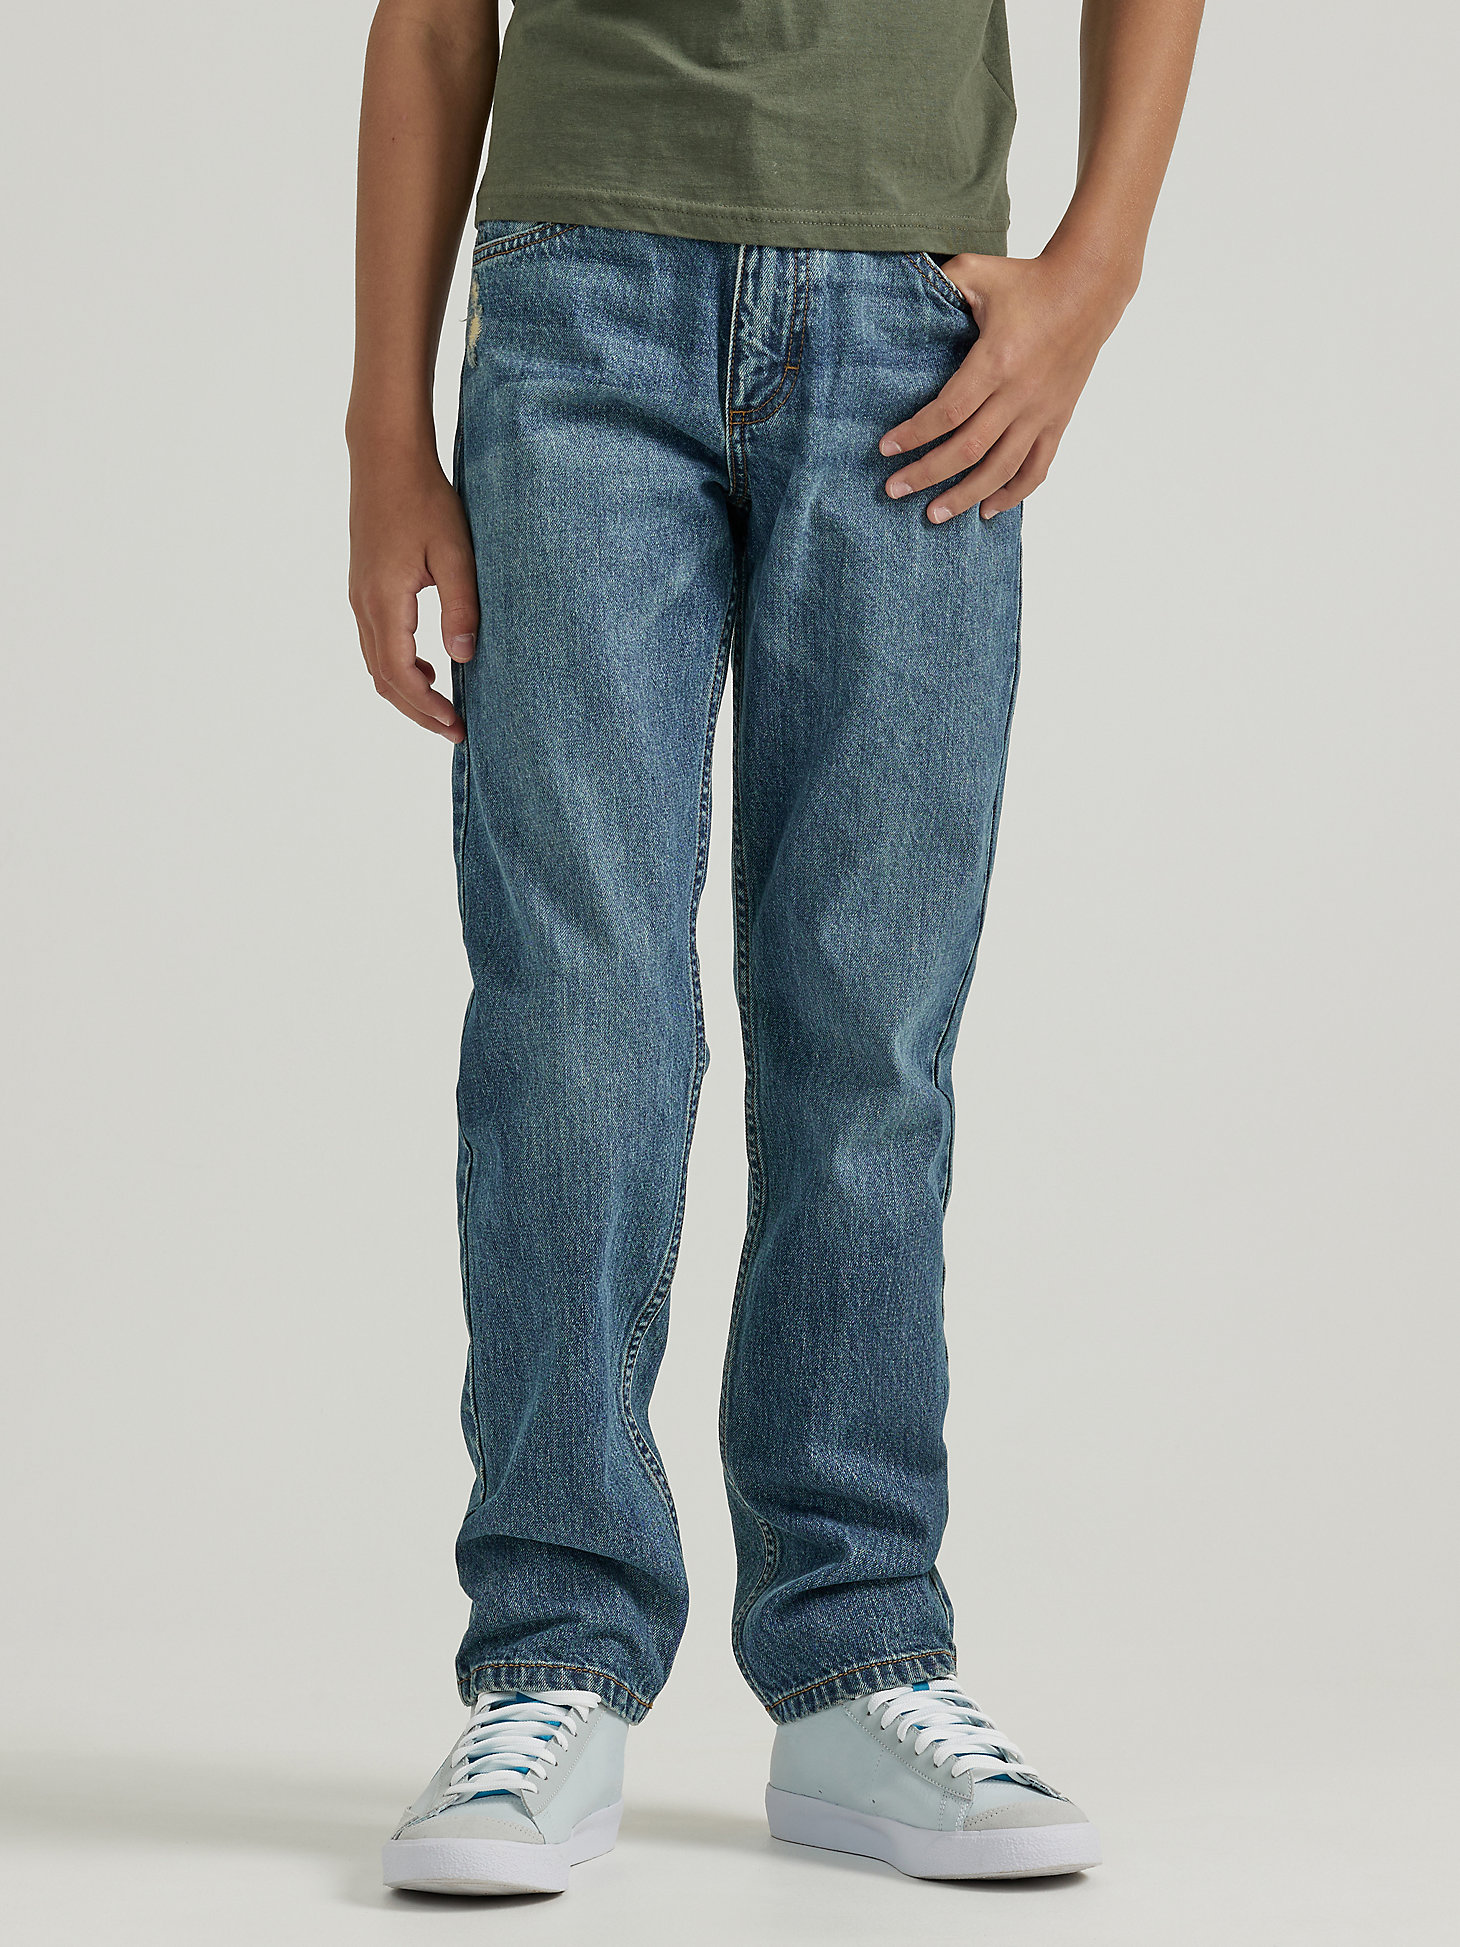 Boy's Relaxed Fit Tapered Jean (4-7) in Outlaw Blue alternative view 1